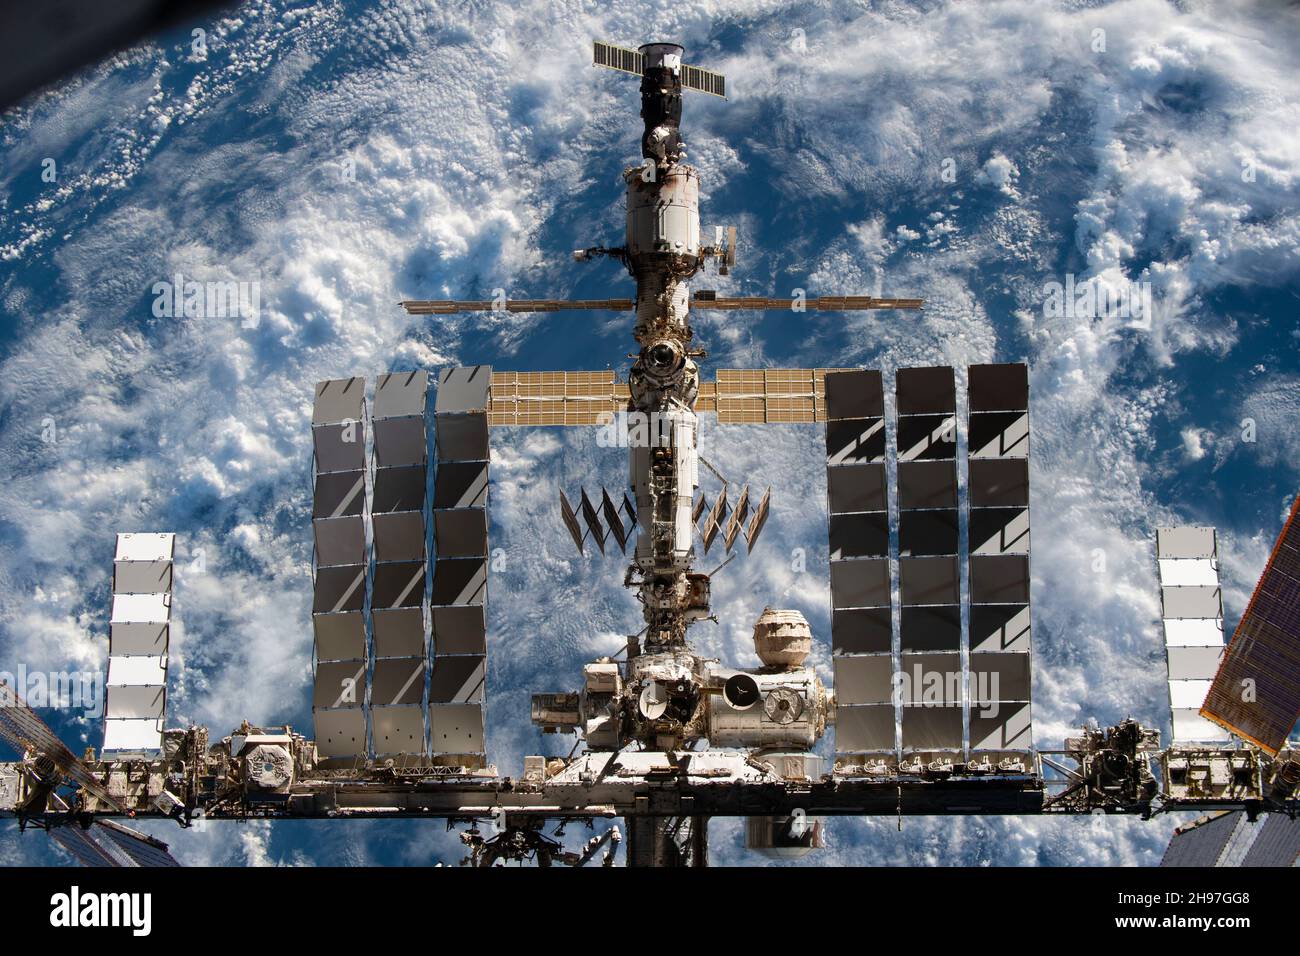 ABOARD CREW DRAGON ENDEAVOUR, EARTH - 08 November 2021 - The International Space Station is pictured from the SpaceX Crew Dragon Endeavour during a fl Stock Photo